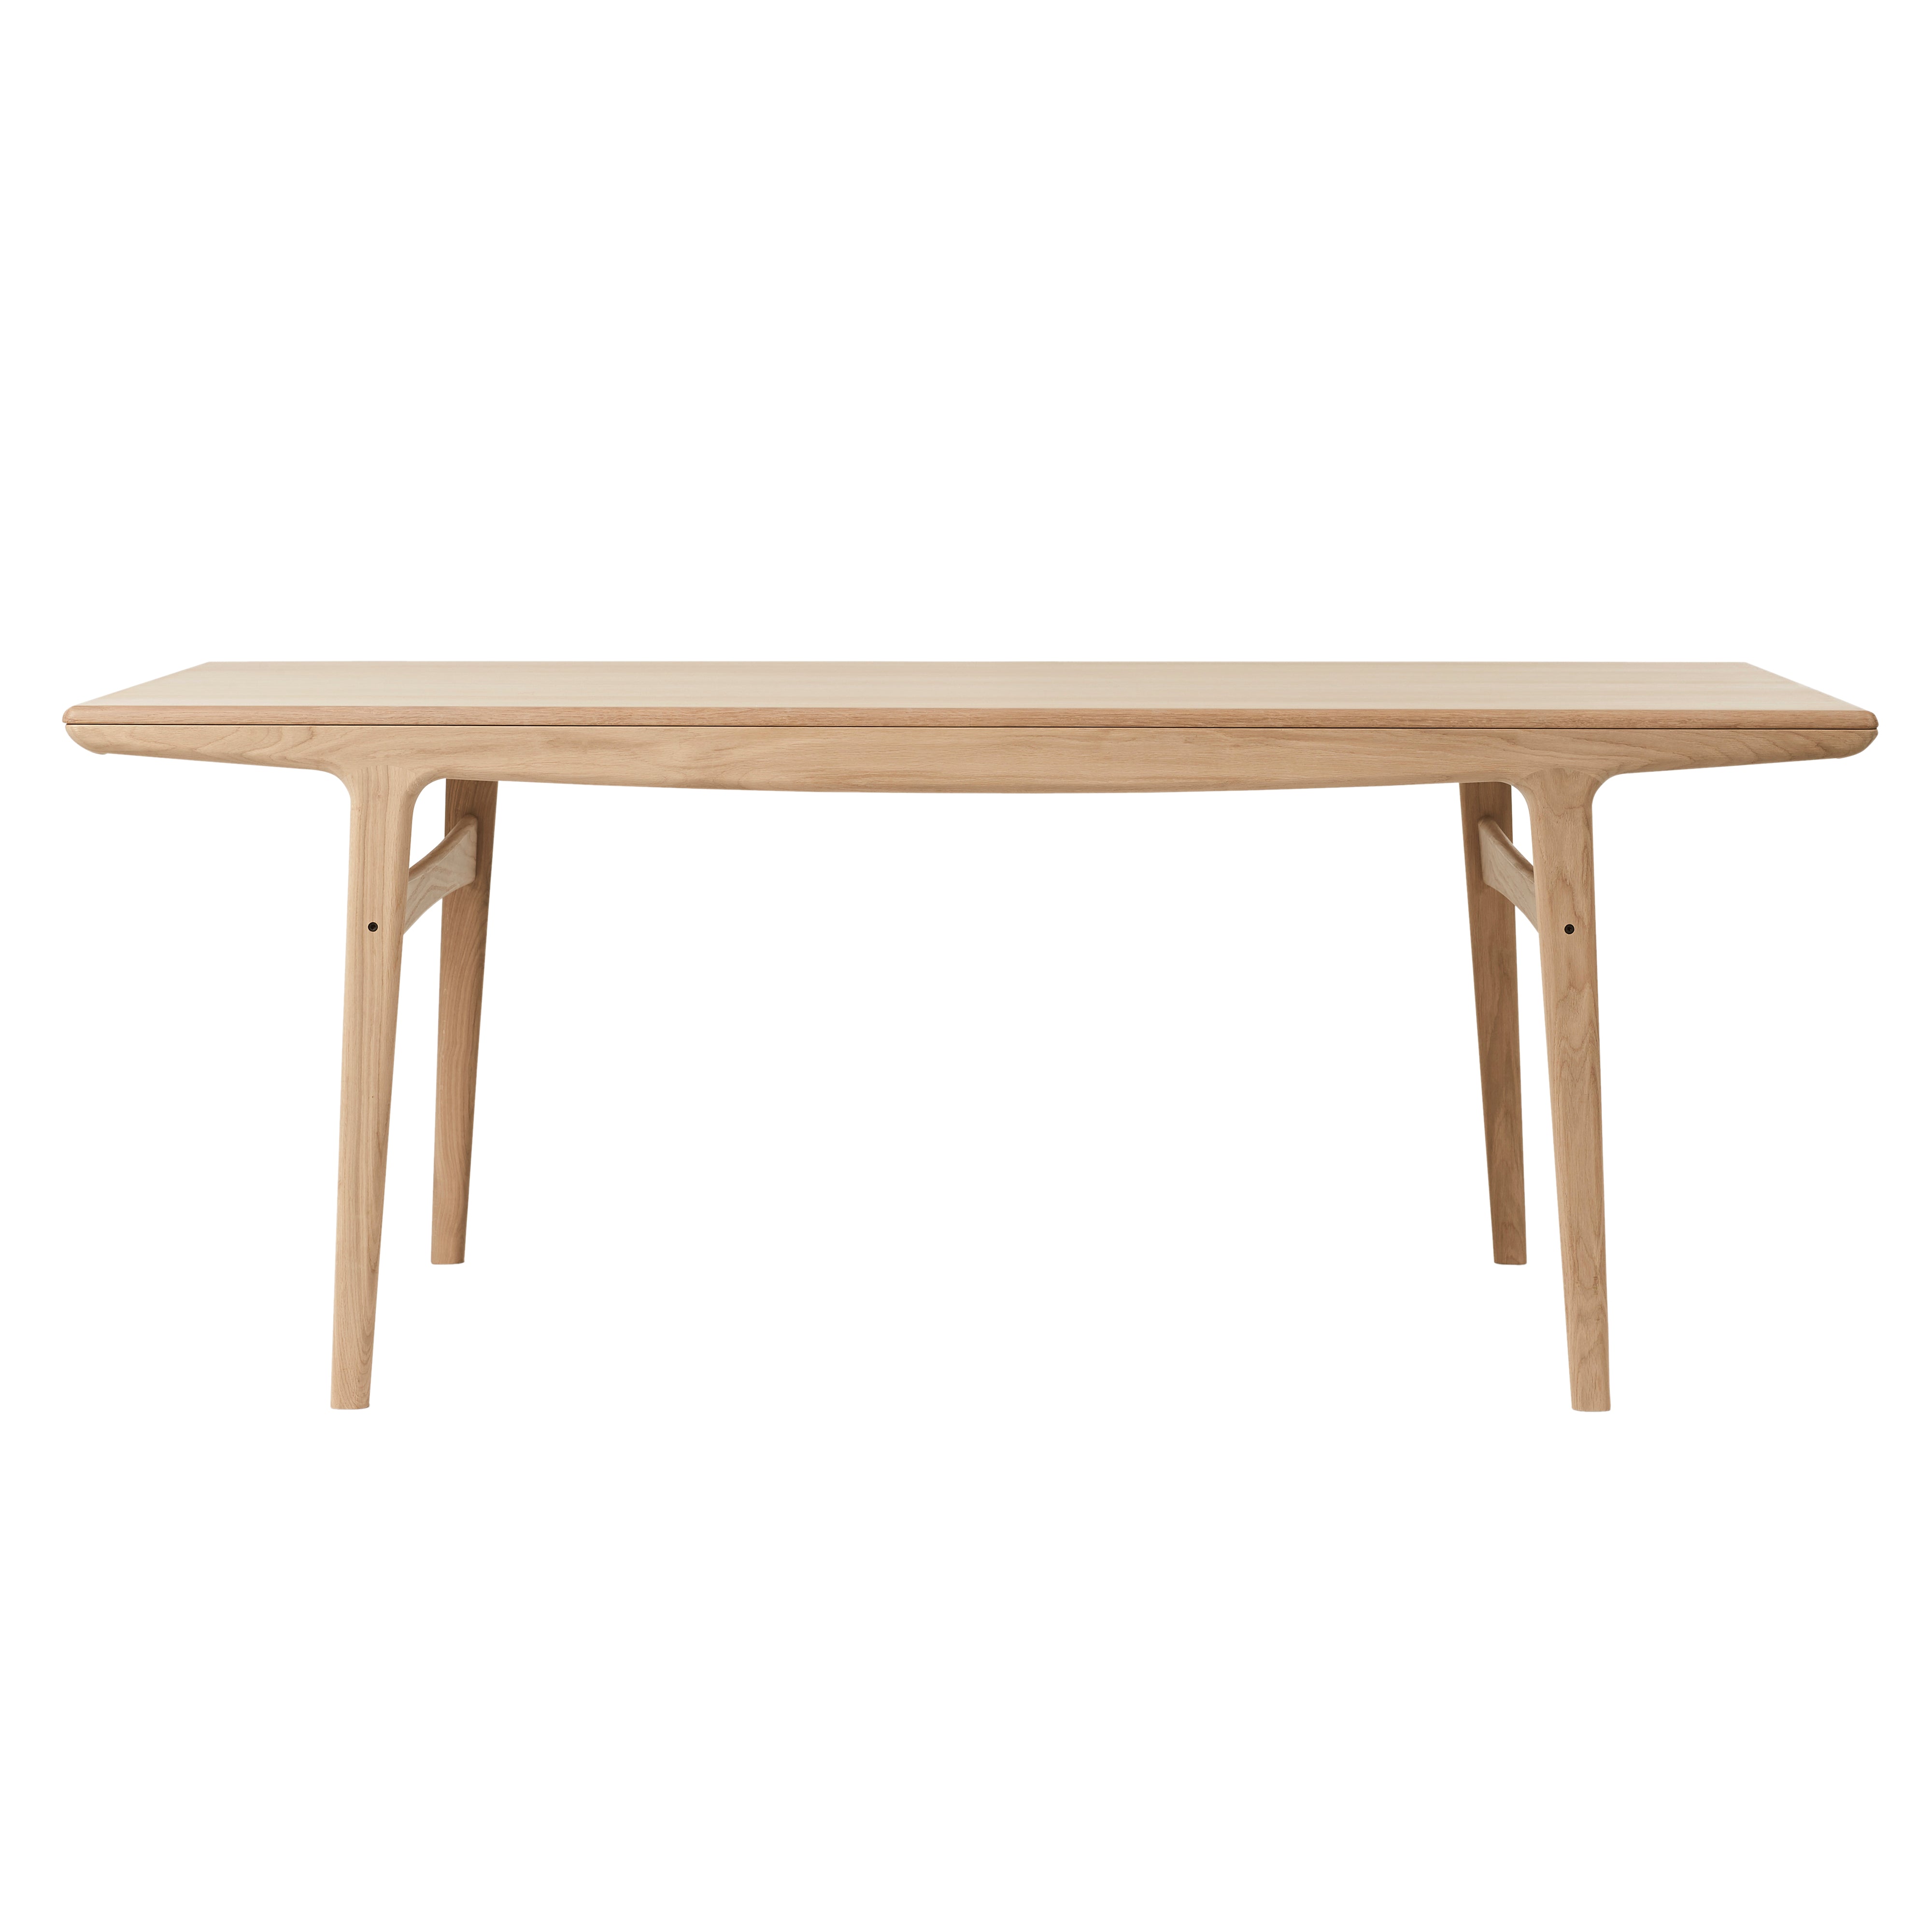 Evermore Dining Table: Without Extension + Large - 74.8